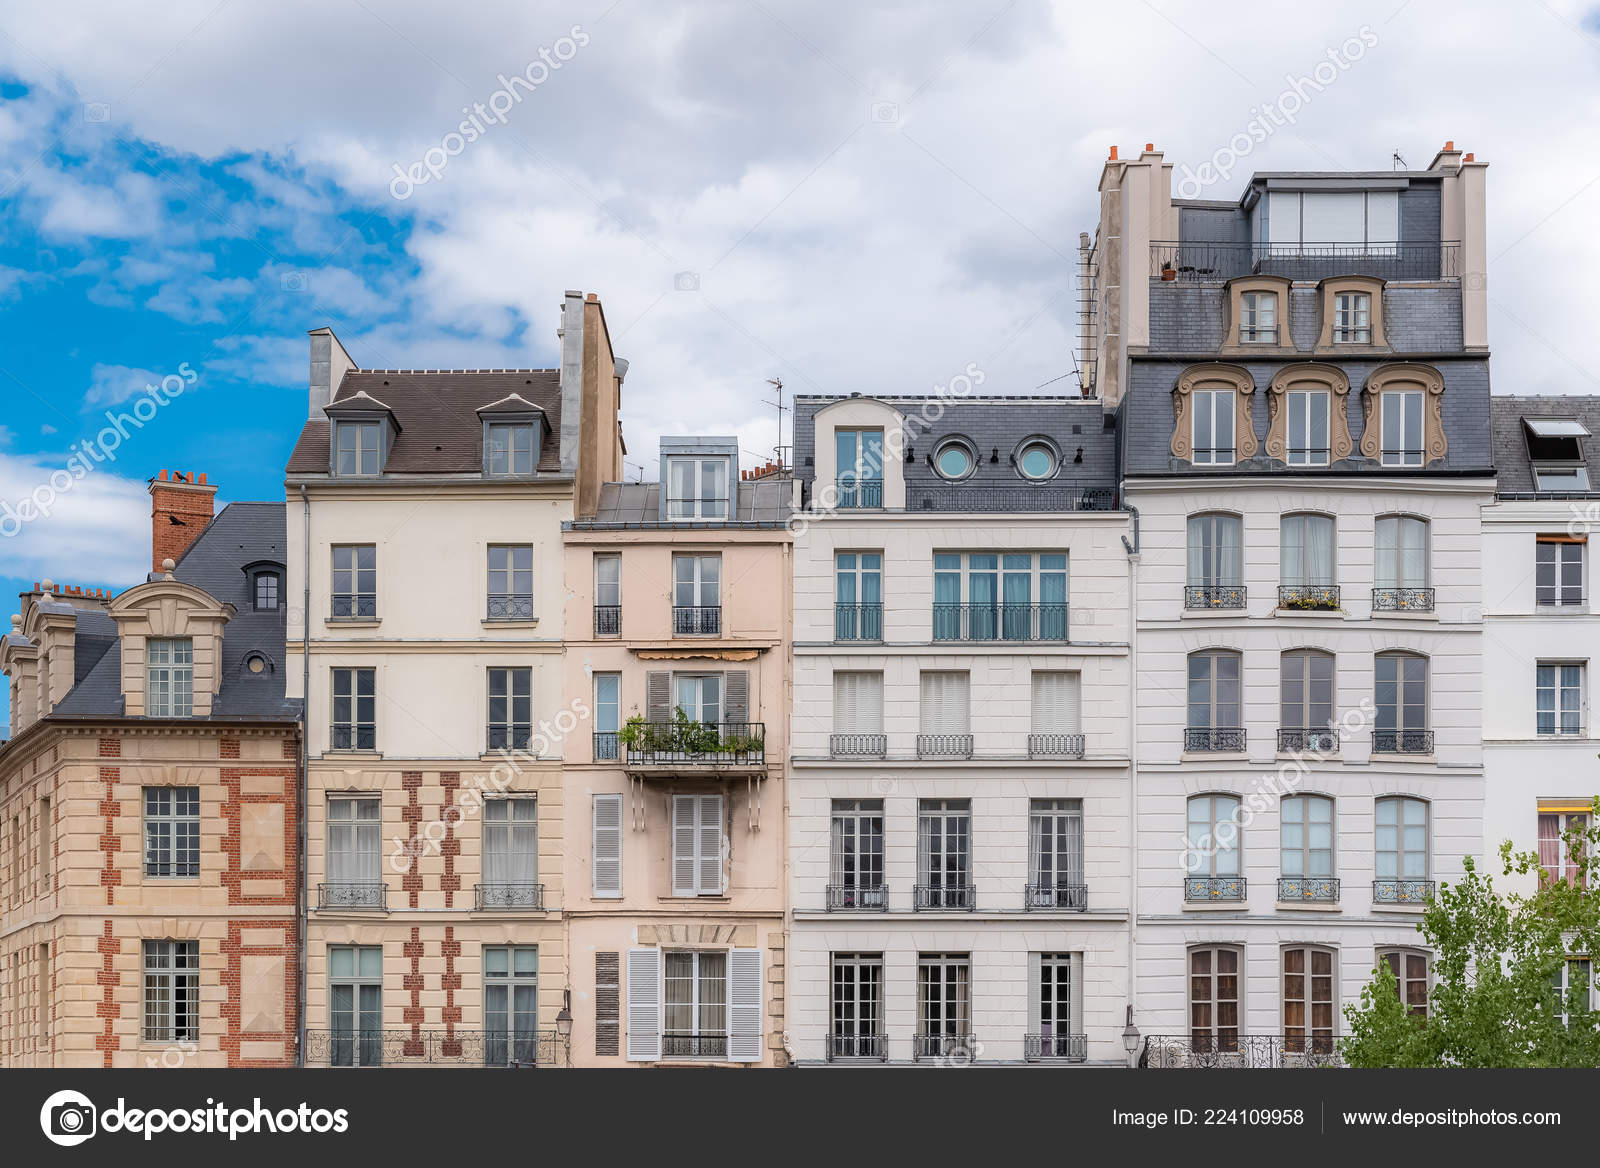 Paris Typical Facades Center Old Narrow Buildings Stock Photo by ...